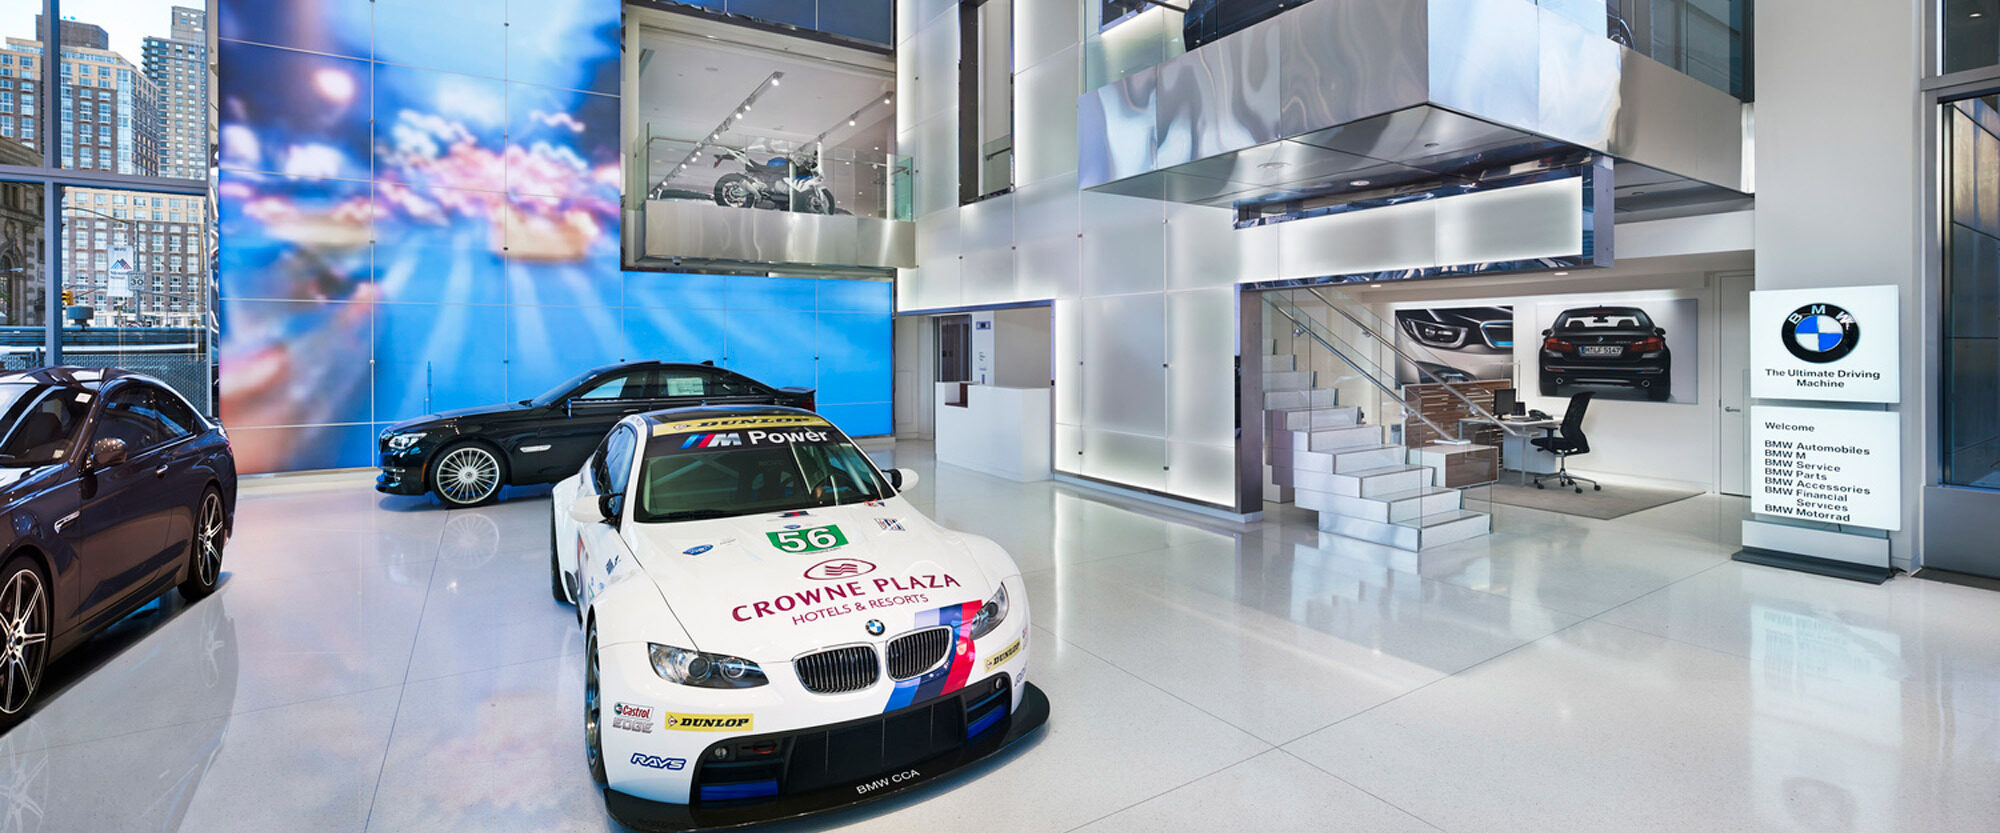 Spacious automotive showroom with gleaming white floors, full-height windows, and multiple cars on display, including a prominent race car. Two-story glass partitions enhance the modern, airy ambiance, while sleek metallic staircases offer views to the second level.